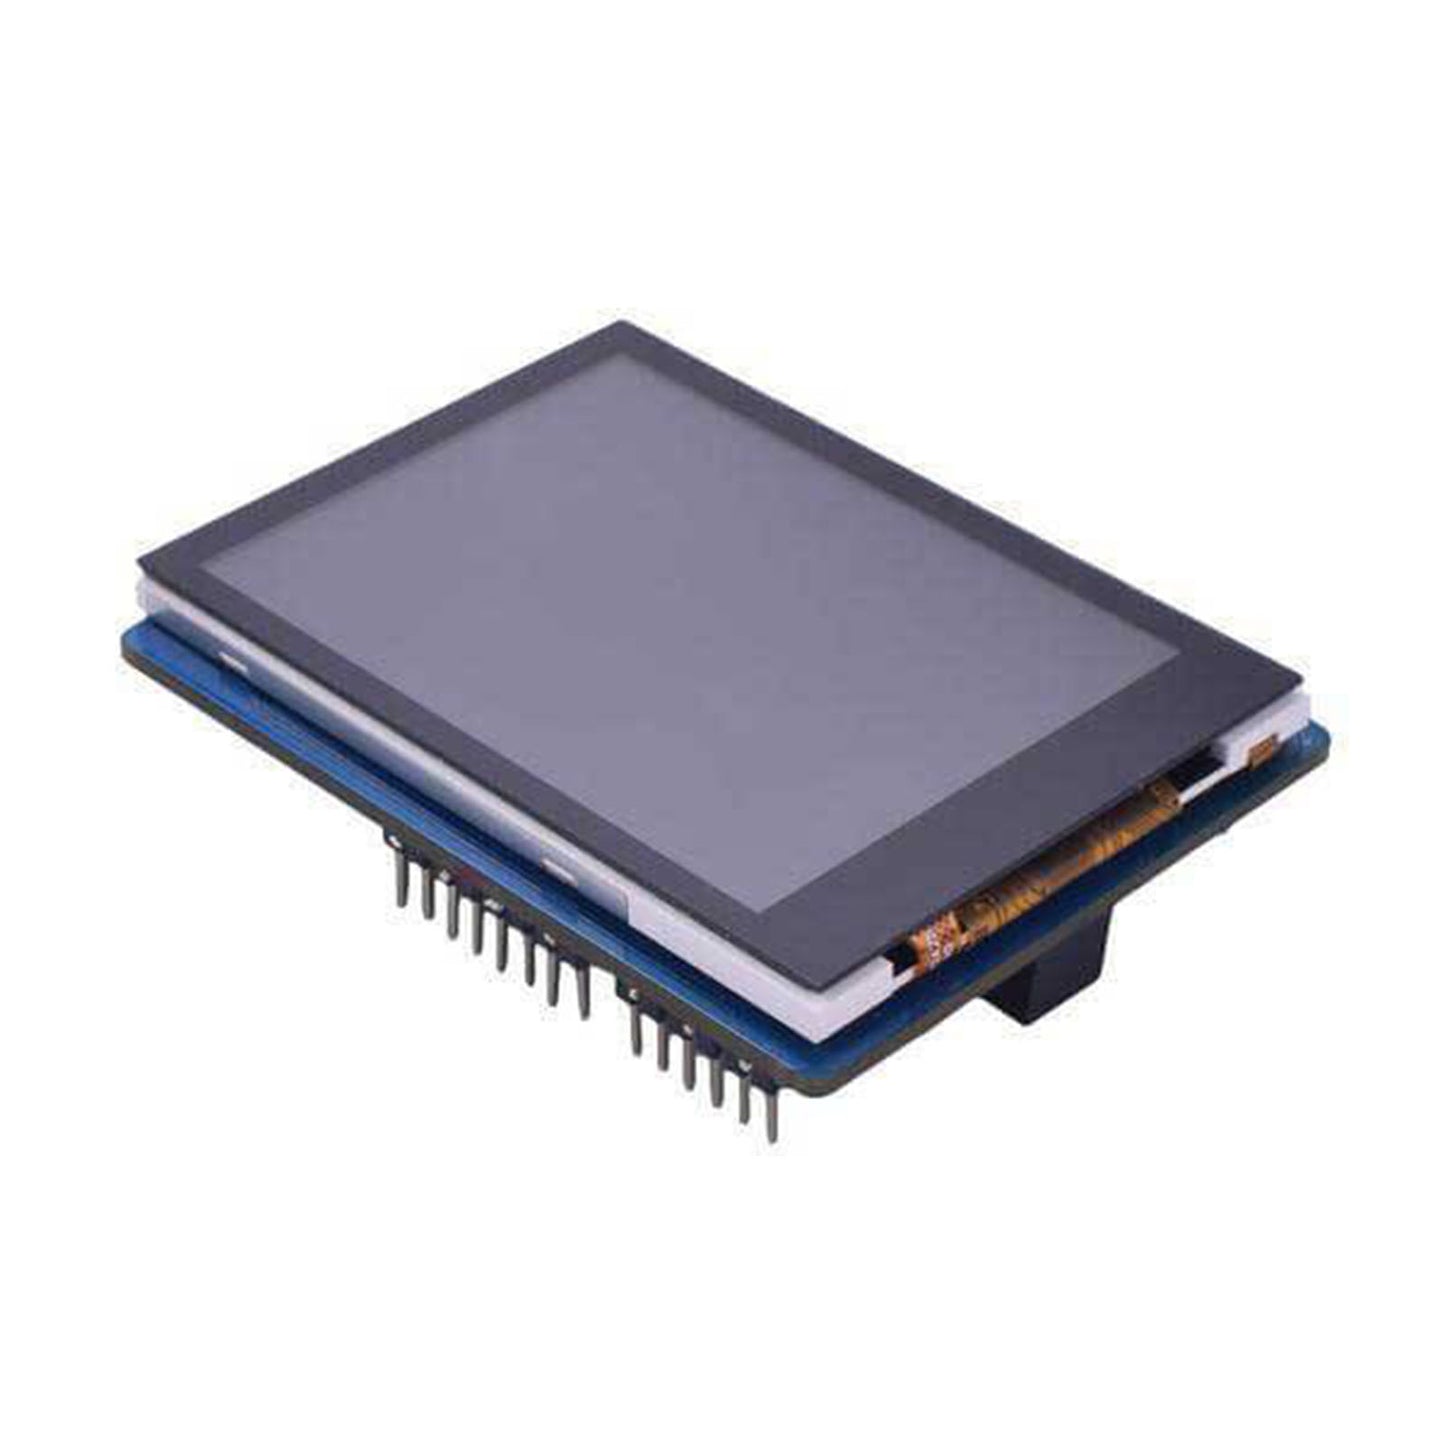 Top view of 2.8 inch TFT LCD Display Module